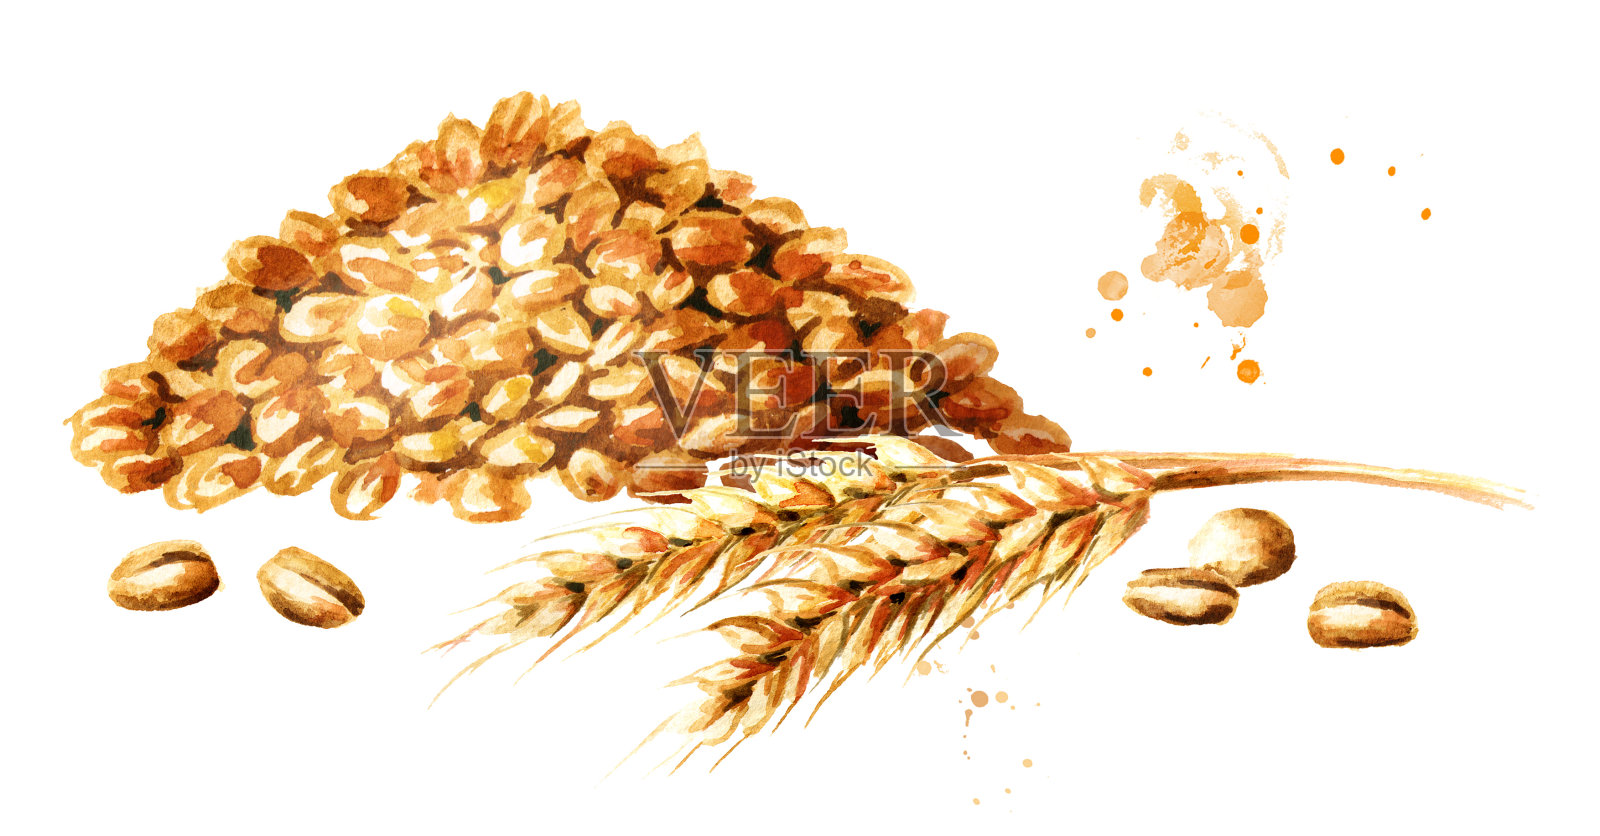 Wheat ear and a bunch of grain. Watercolor hand drawn illustration, isolated on white background插画图片素材